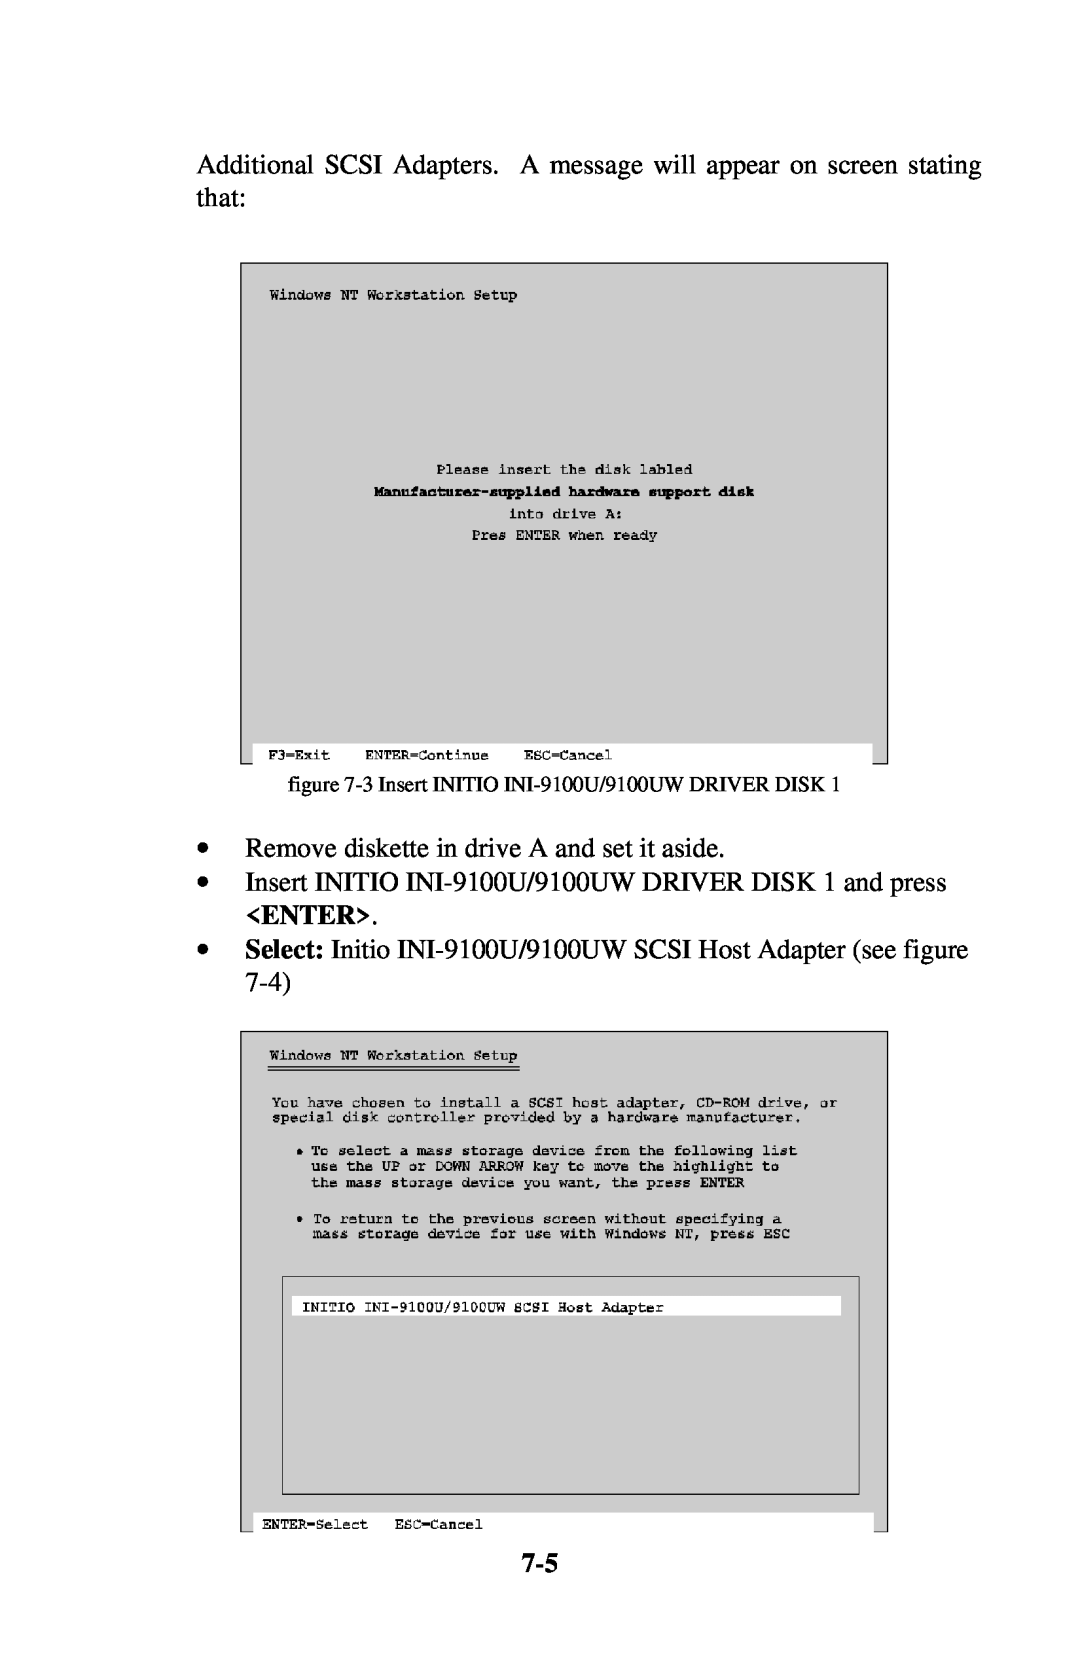 Initio INI-9100UW user manual Enter, ∙ Remove diskette in drive A and set it aside 